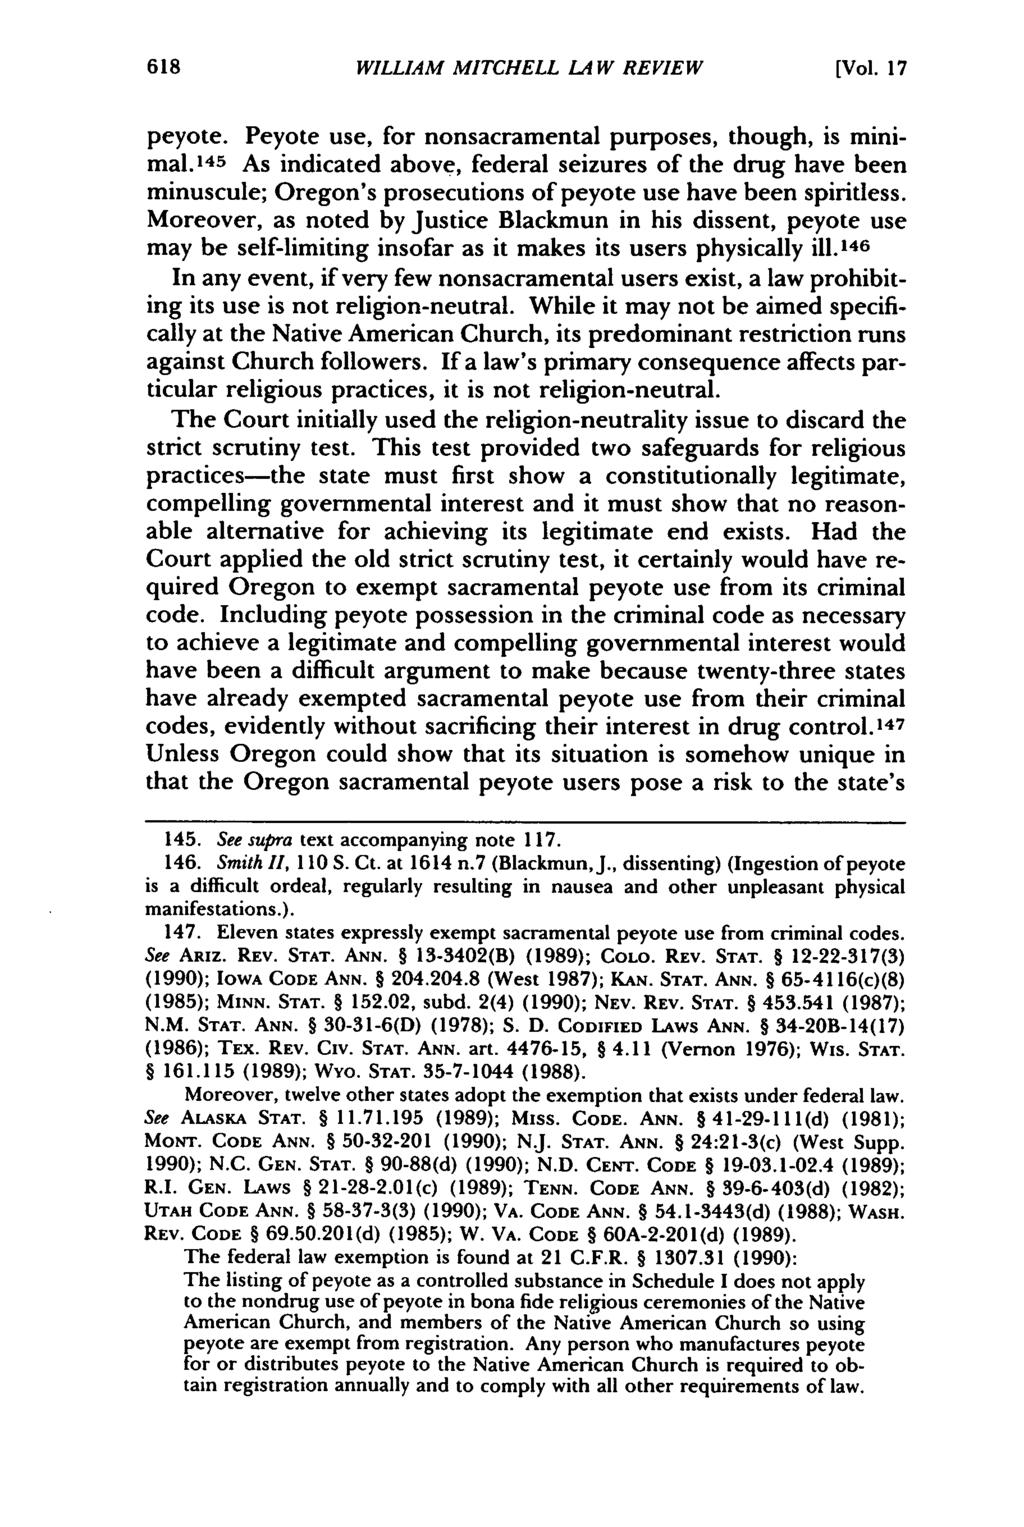 William Mitchell Law Review, Vol. 17, Iss. 2 [1991], Art. 16 WILLIAM MITCHELL LA W REVIEW [Vol. 17 peyote. Peyote use, for nonsacramental purposes, though, is minimal.